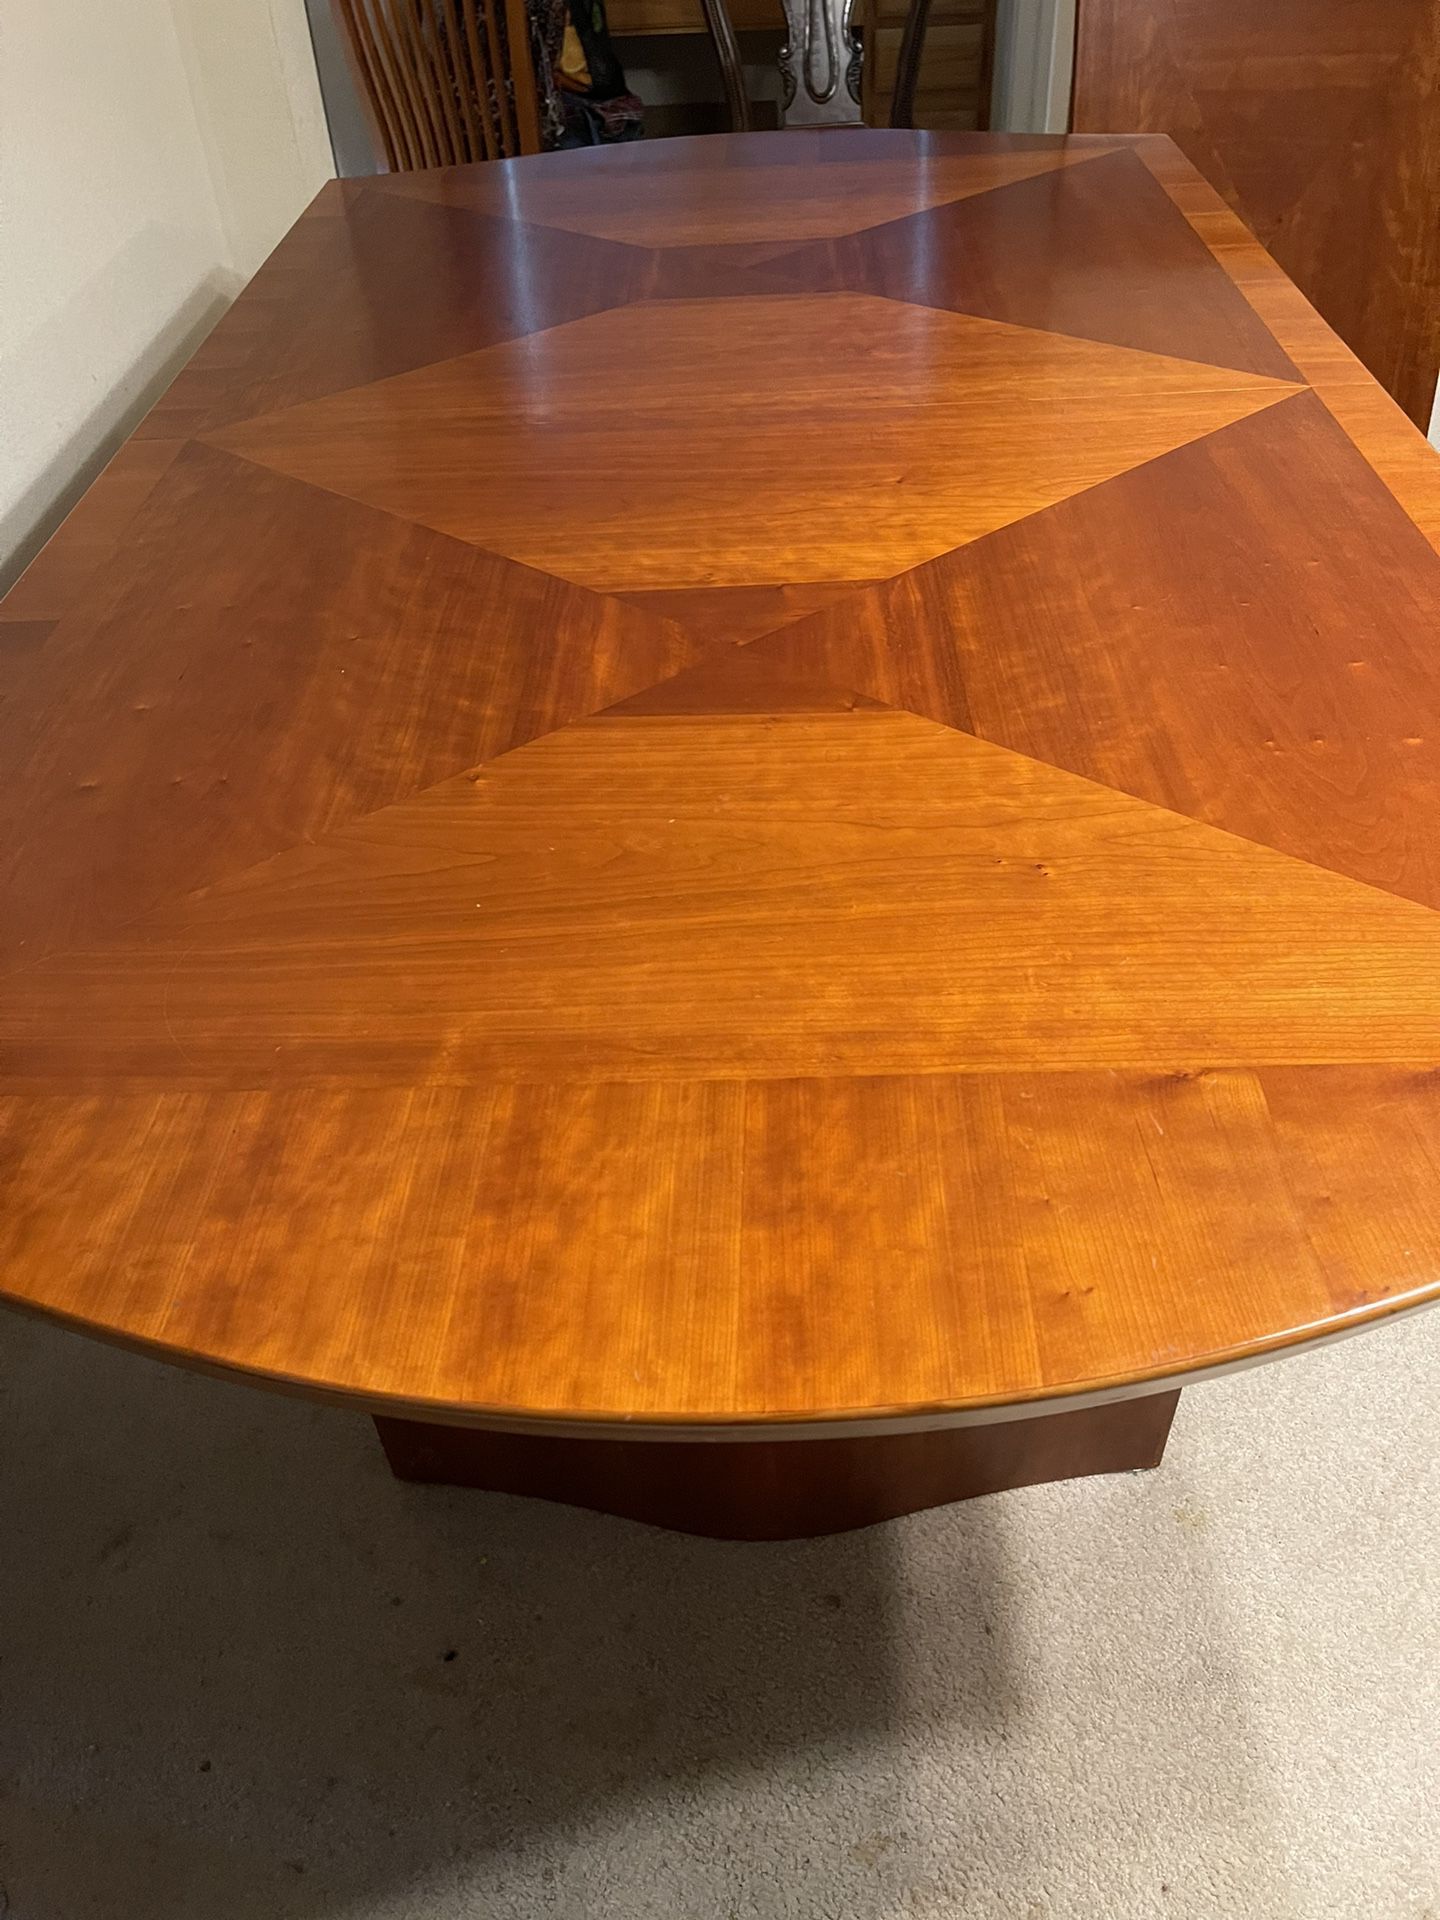 Formal Dining Room Table